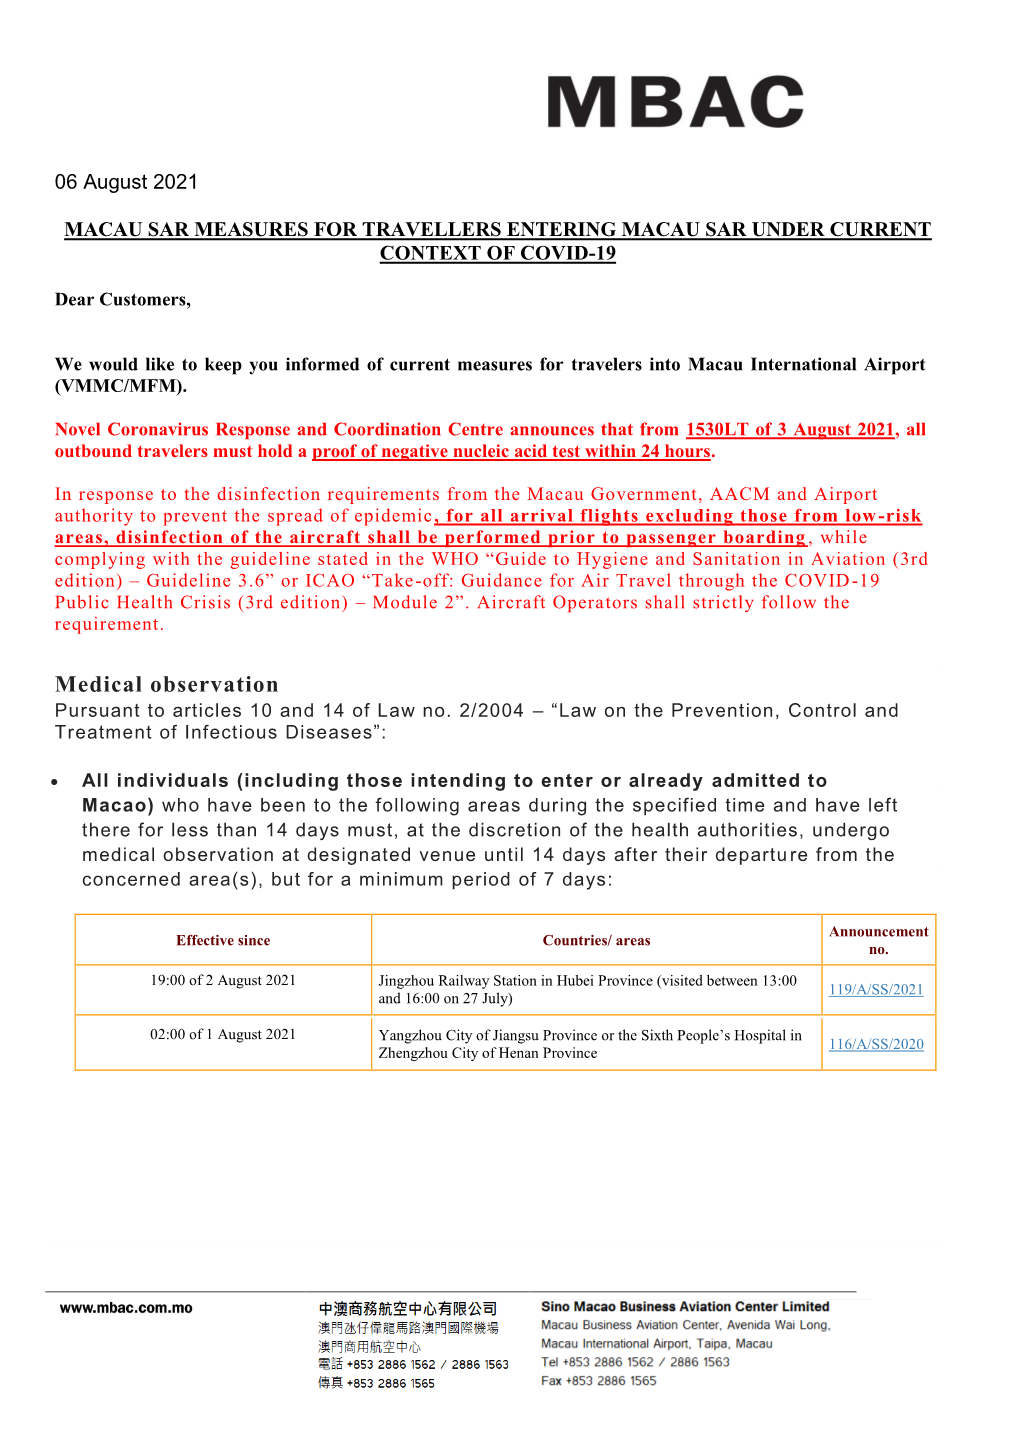 Medical Observation Pursuant to Articles 10 and 14 of Law No